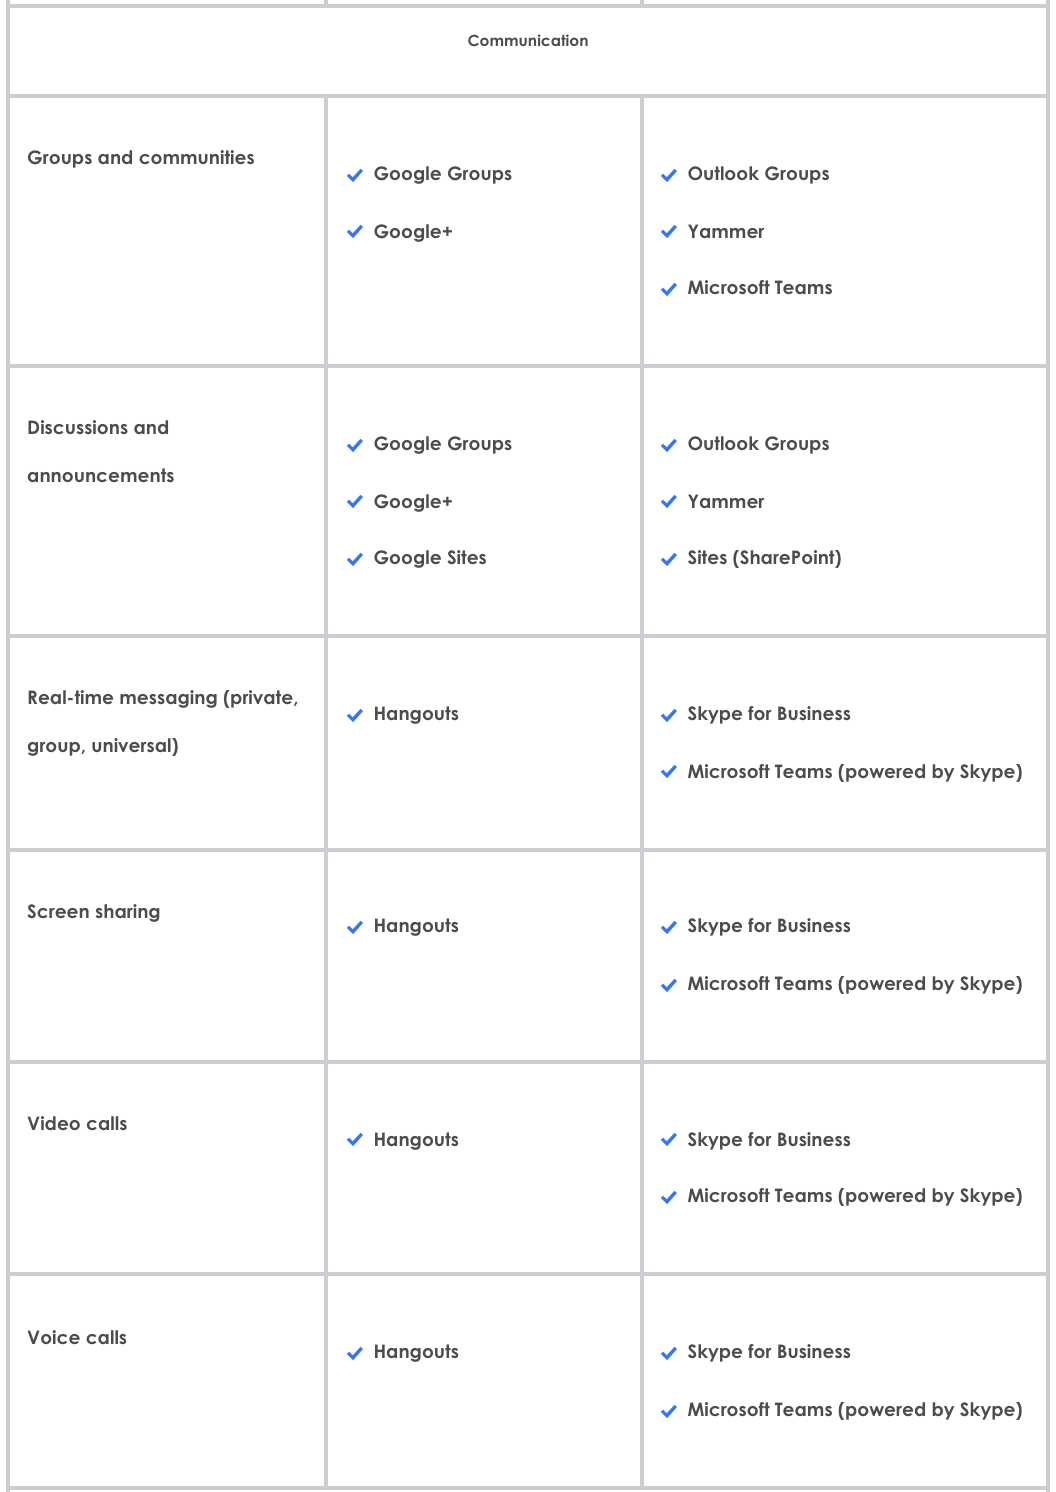 What are the differences between Google and Microsoft?